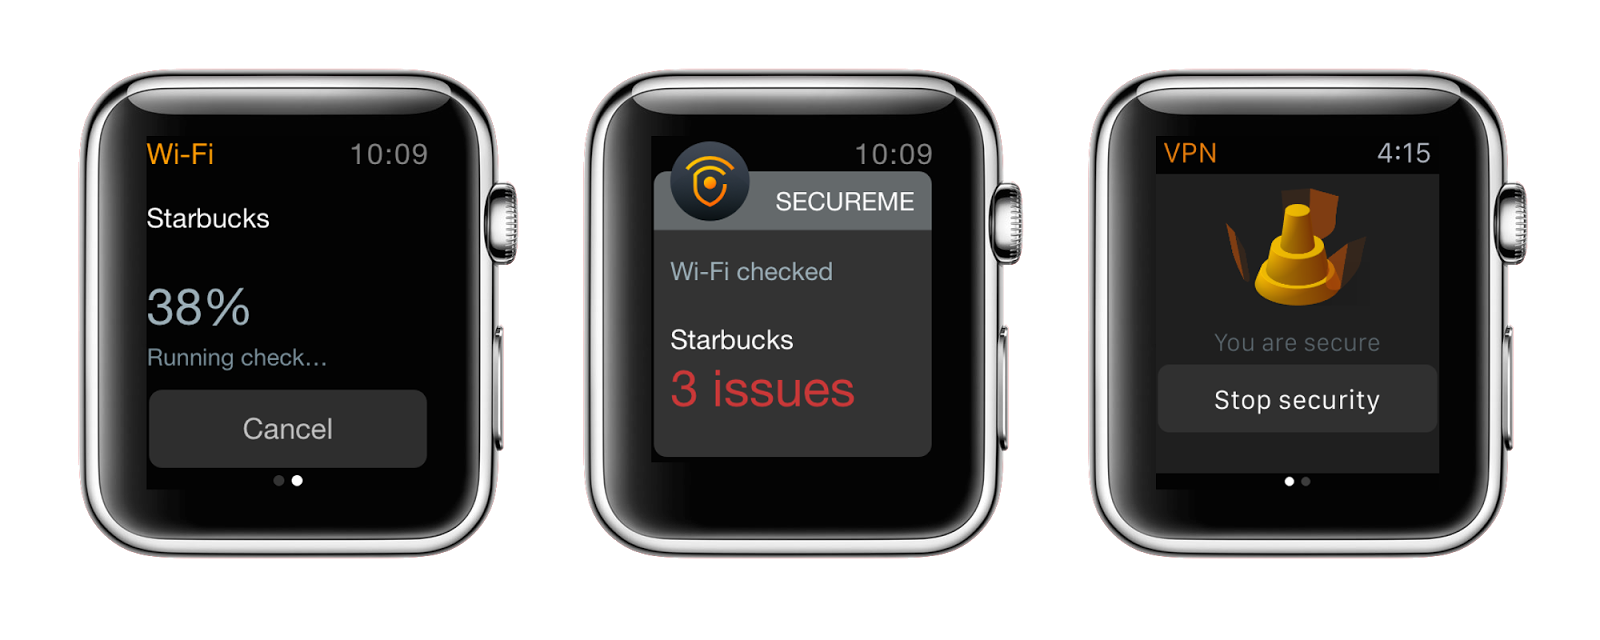 apple security update closes spyware iwatches